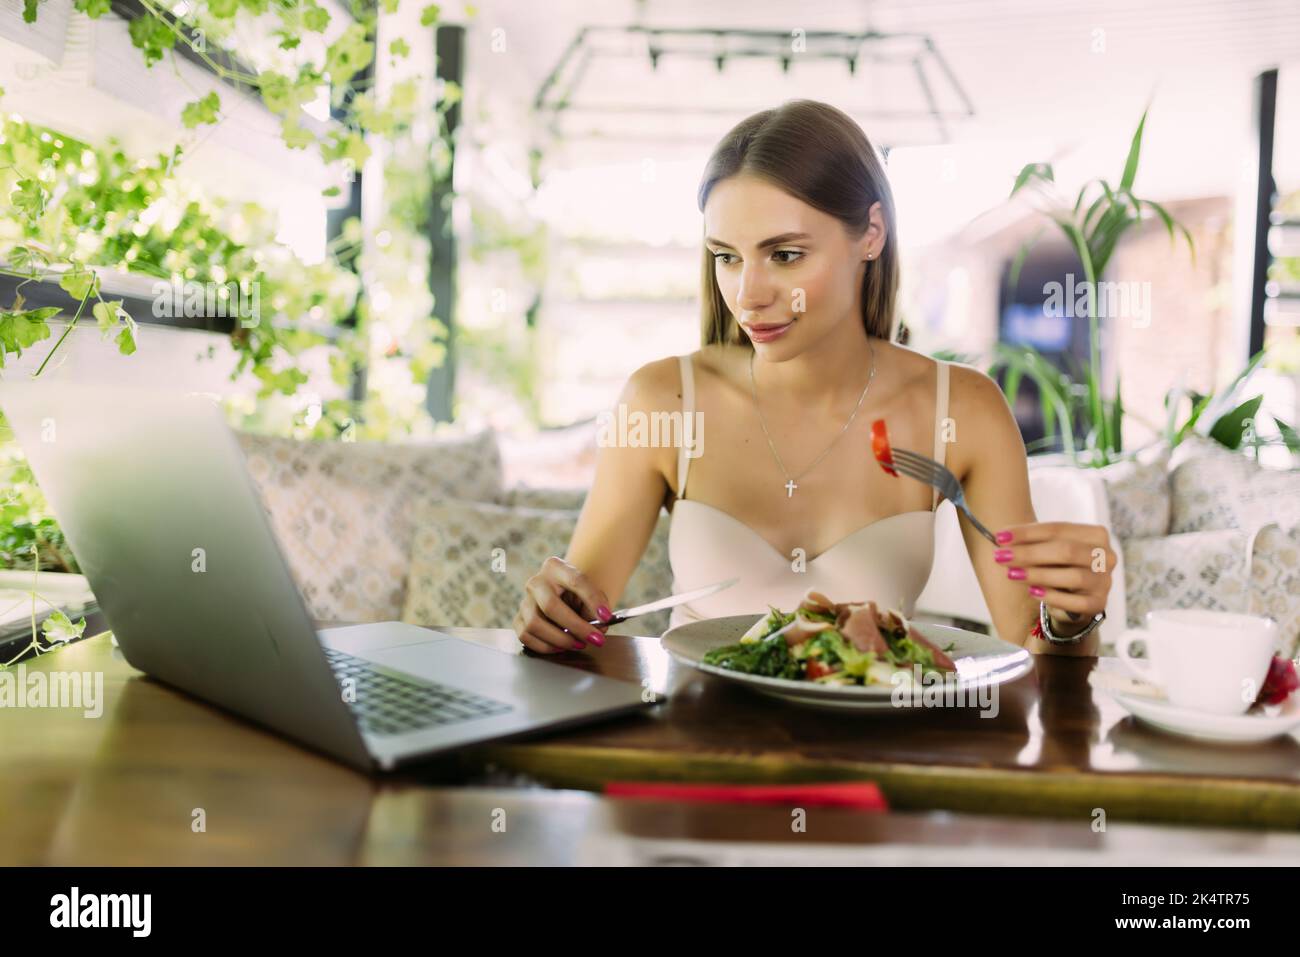 Pensive young business woman having her lunch at the roof top restaurants open air light terrace looking at the screen of her laptop Stock Photo